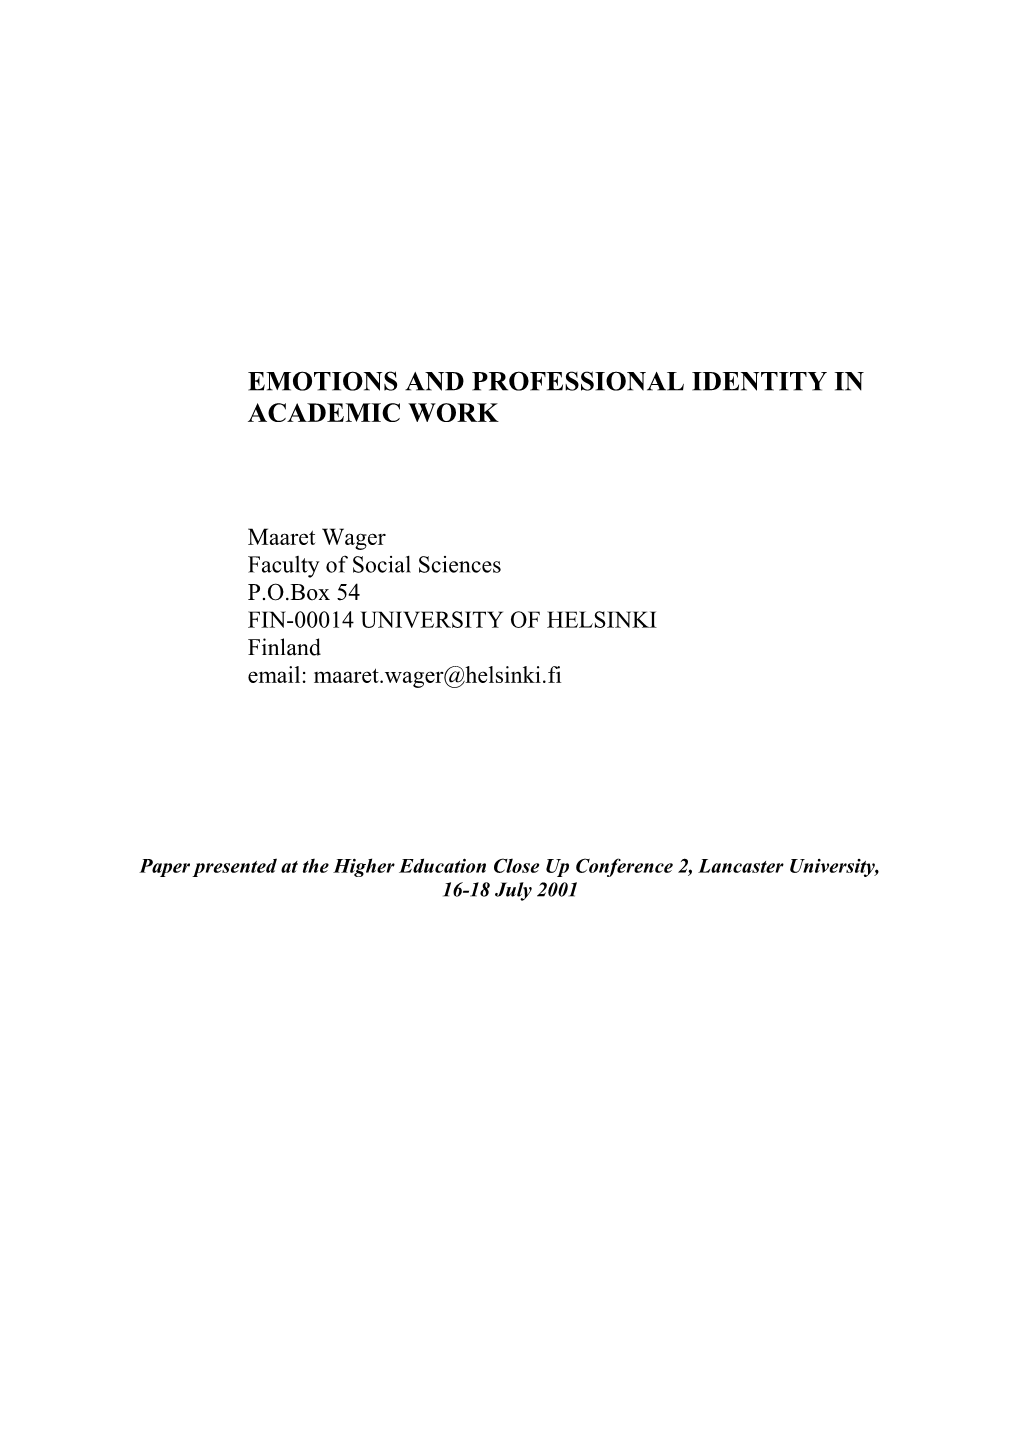 Emotions and Professional Identity in Academic Work